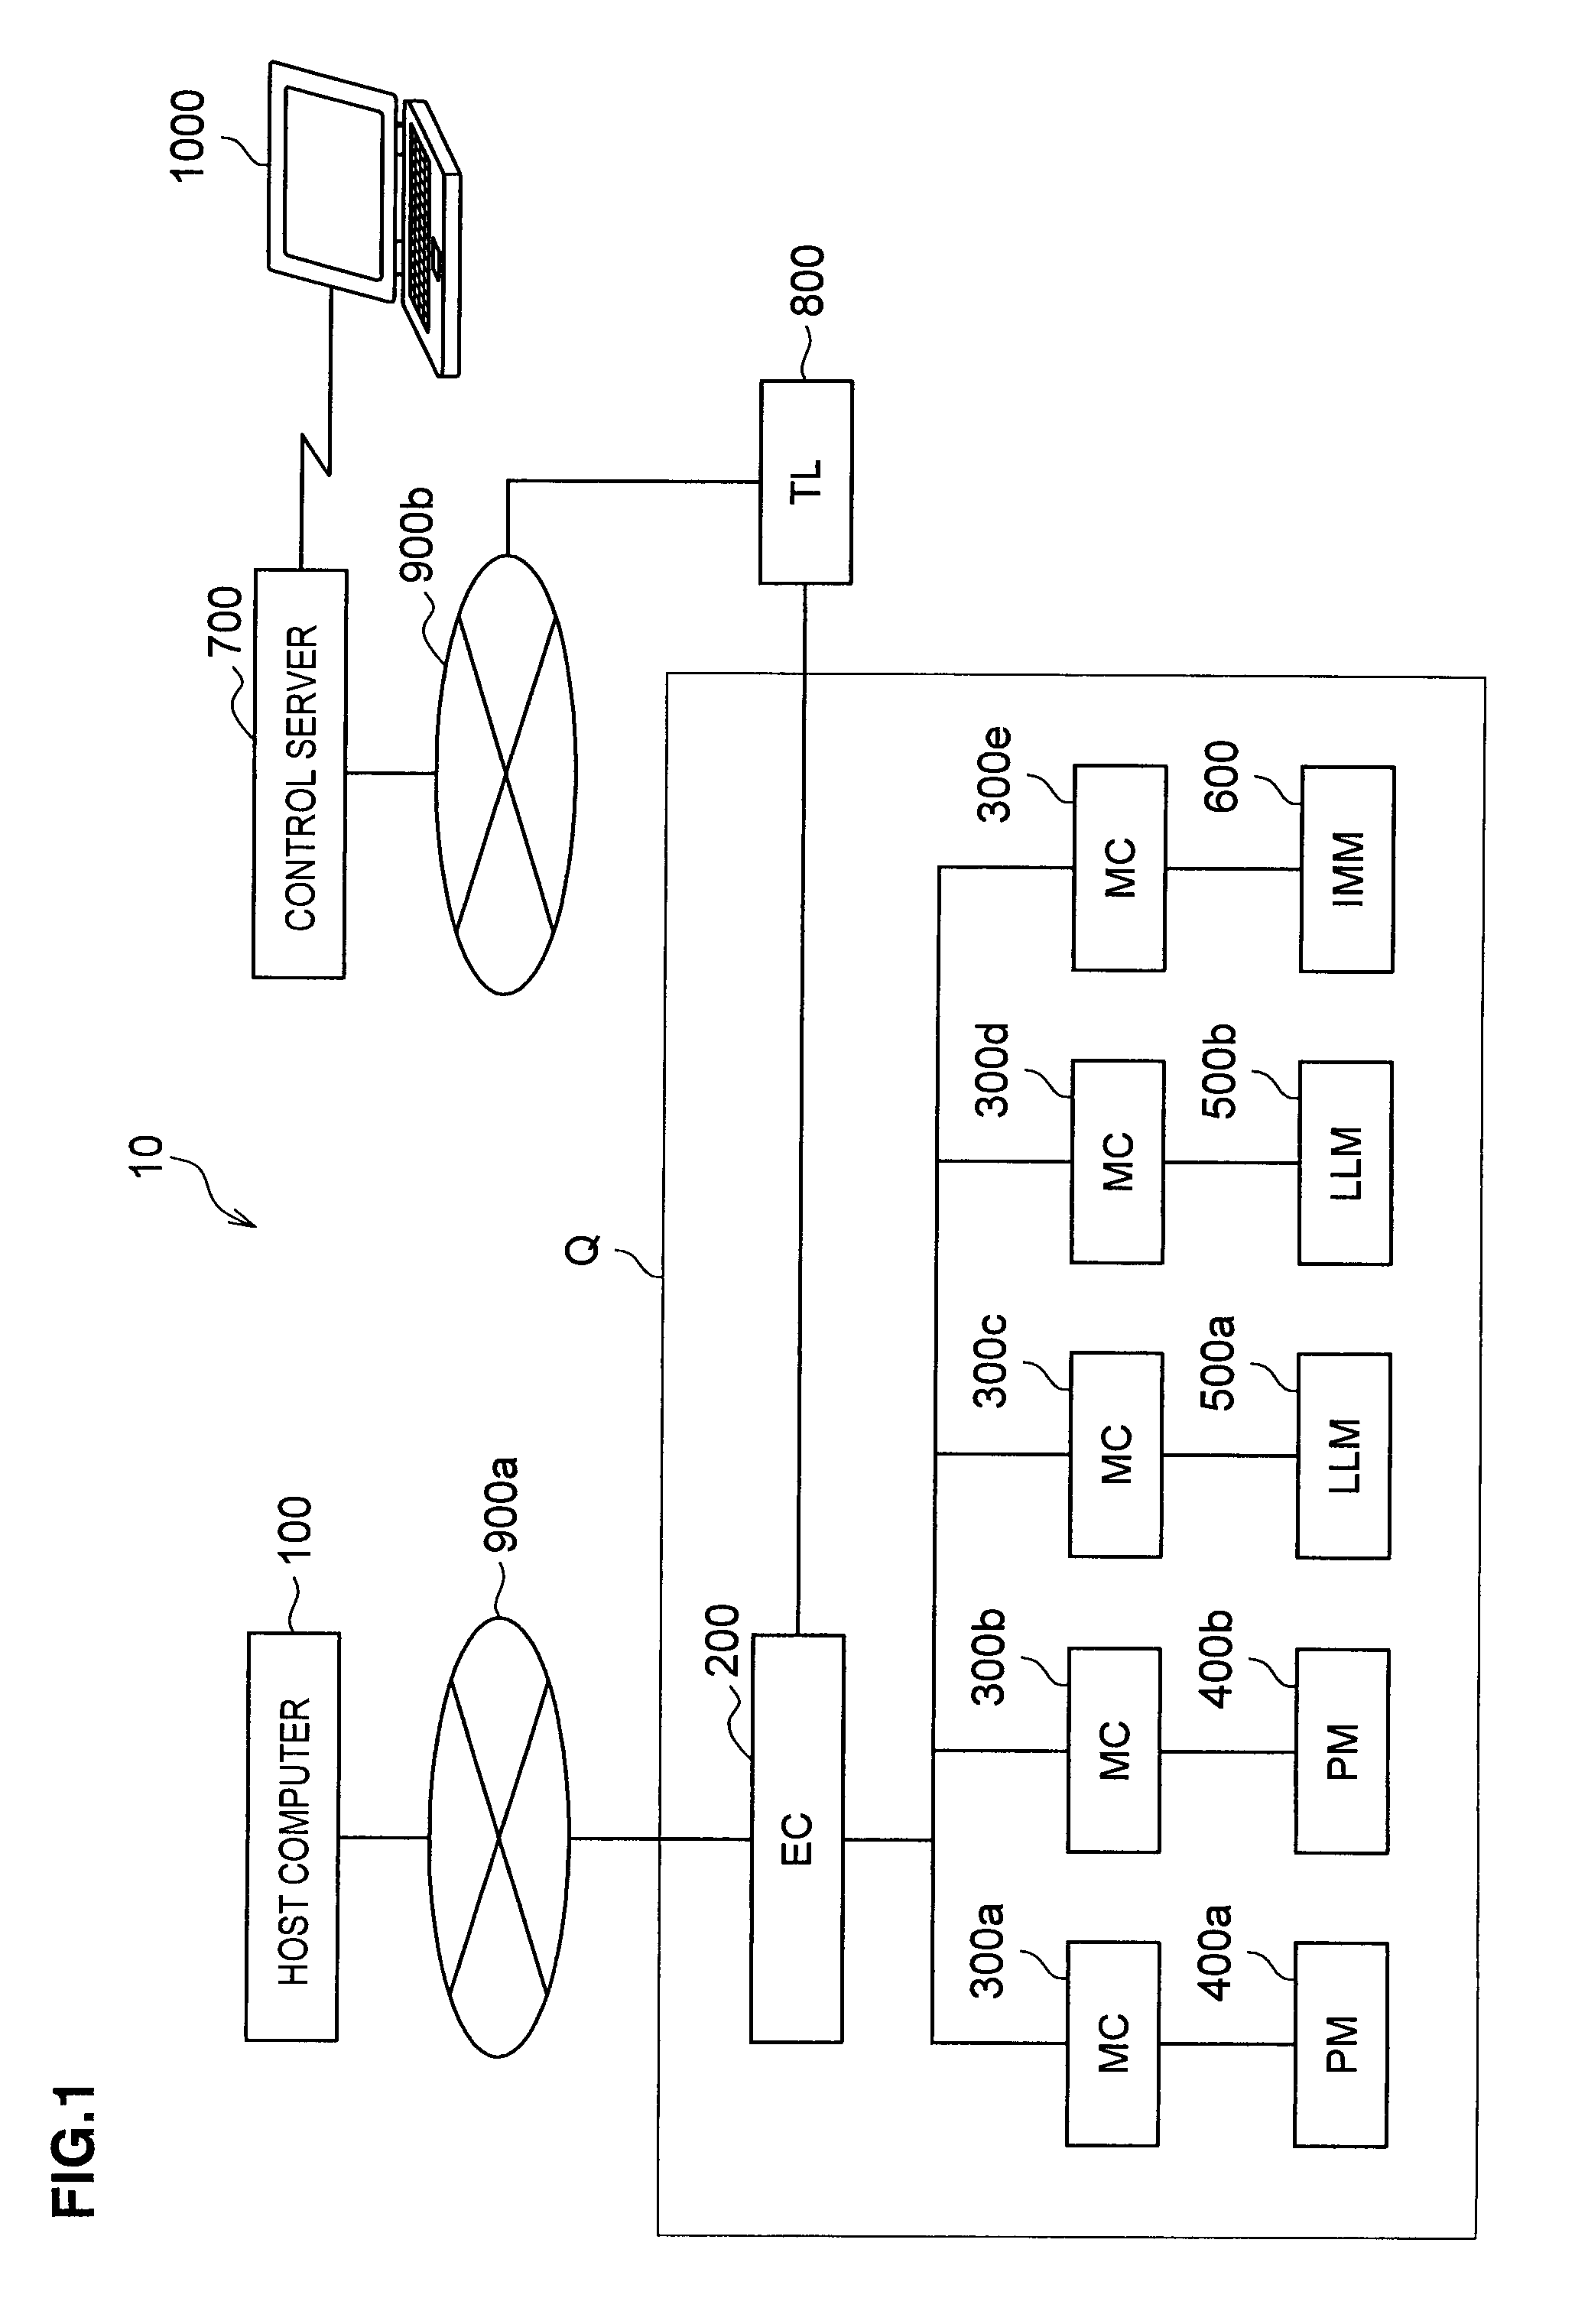 Controlling device for substrate processing apparatus and method therefor